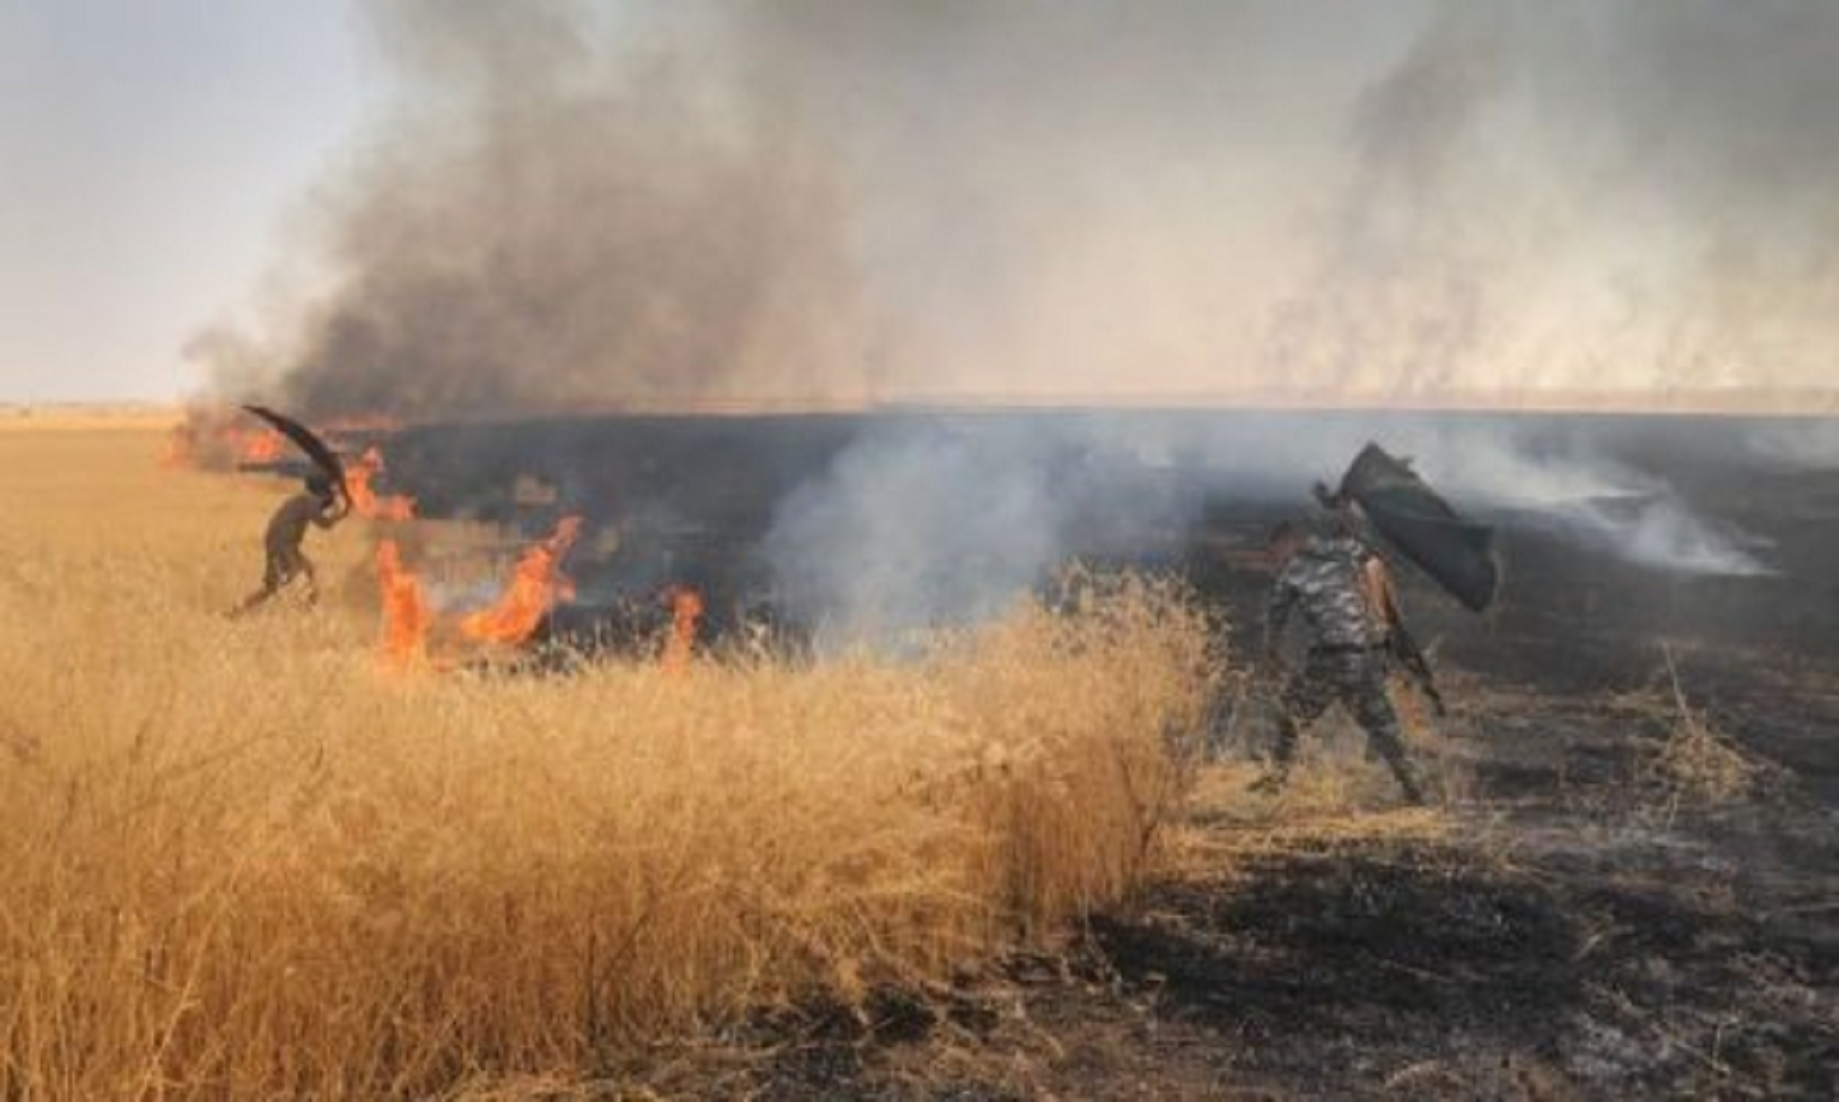 Wheat, Barley Crops Targeted By Rebels’ Arson In NE Syria: Report